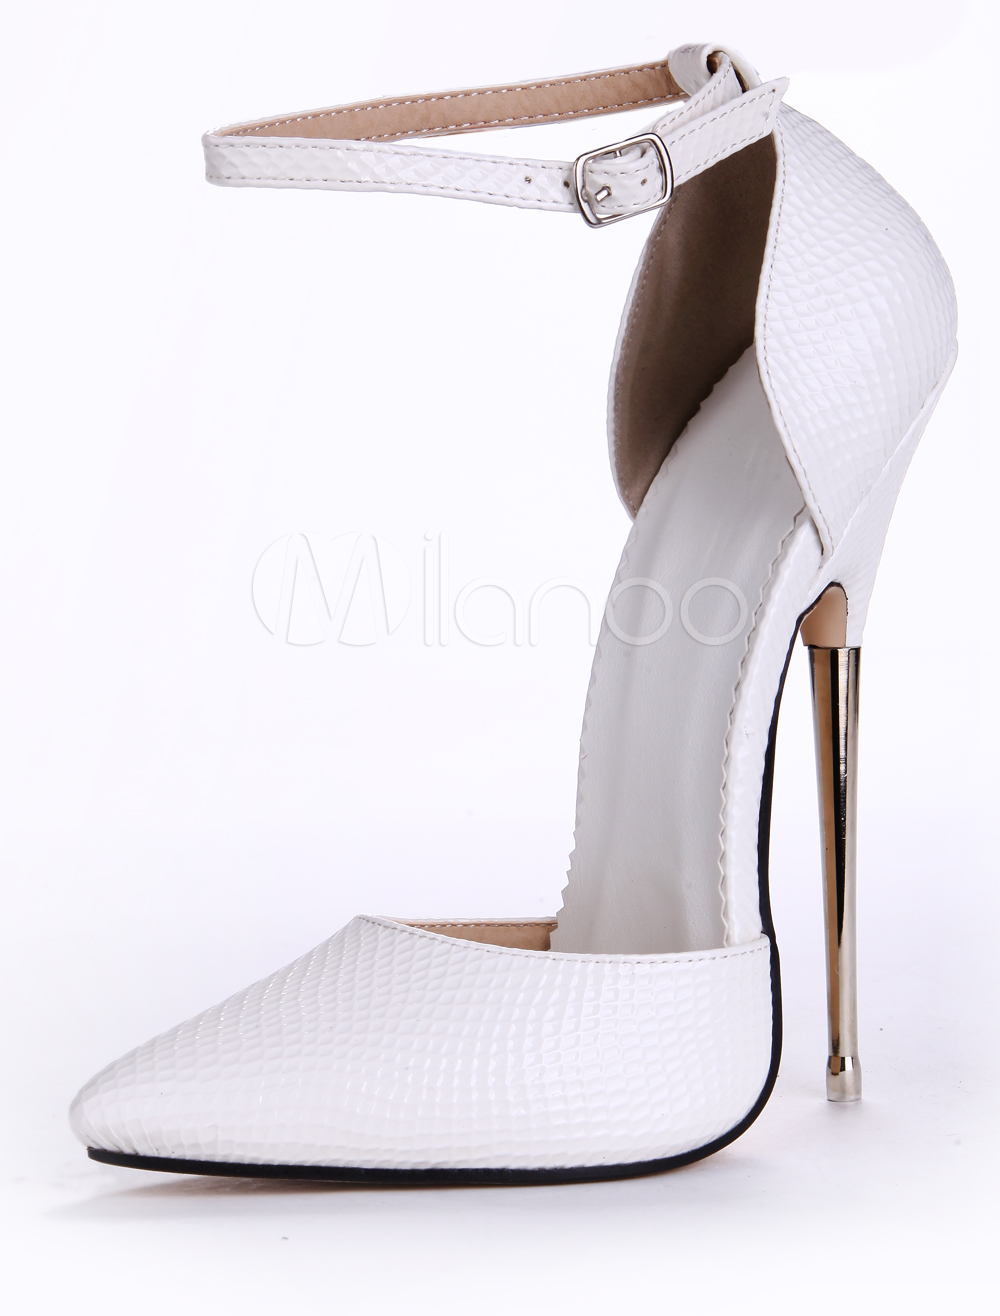 6 inch ankle strap heels